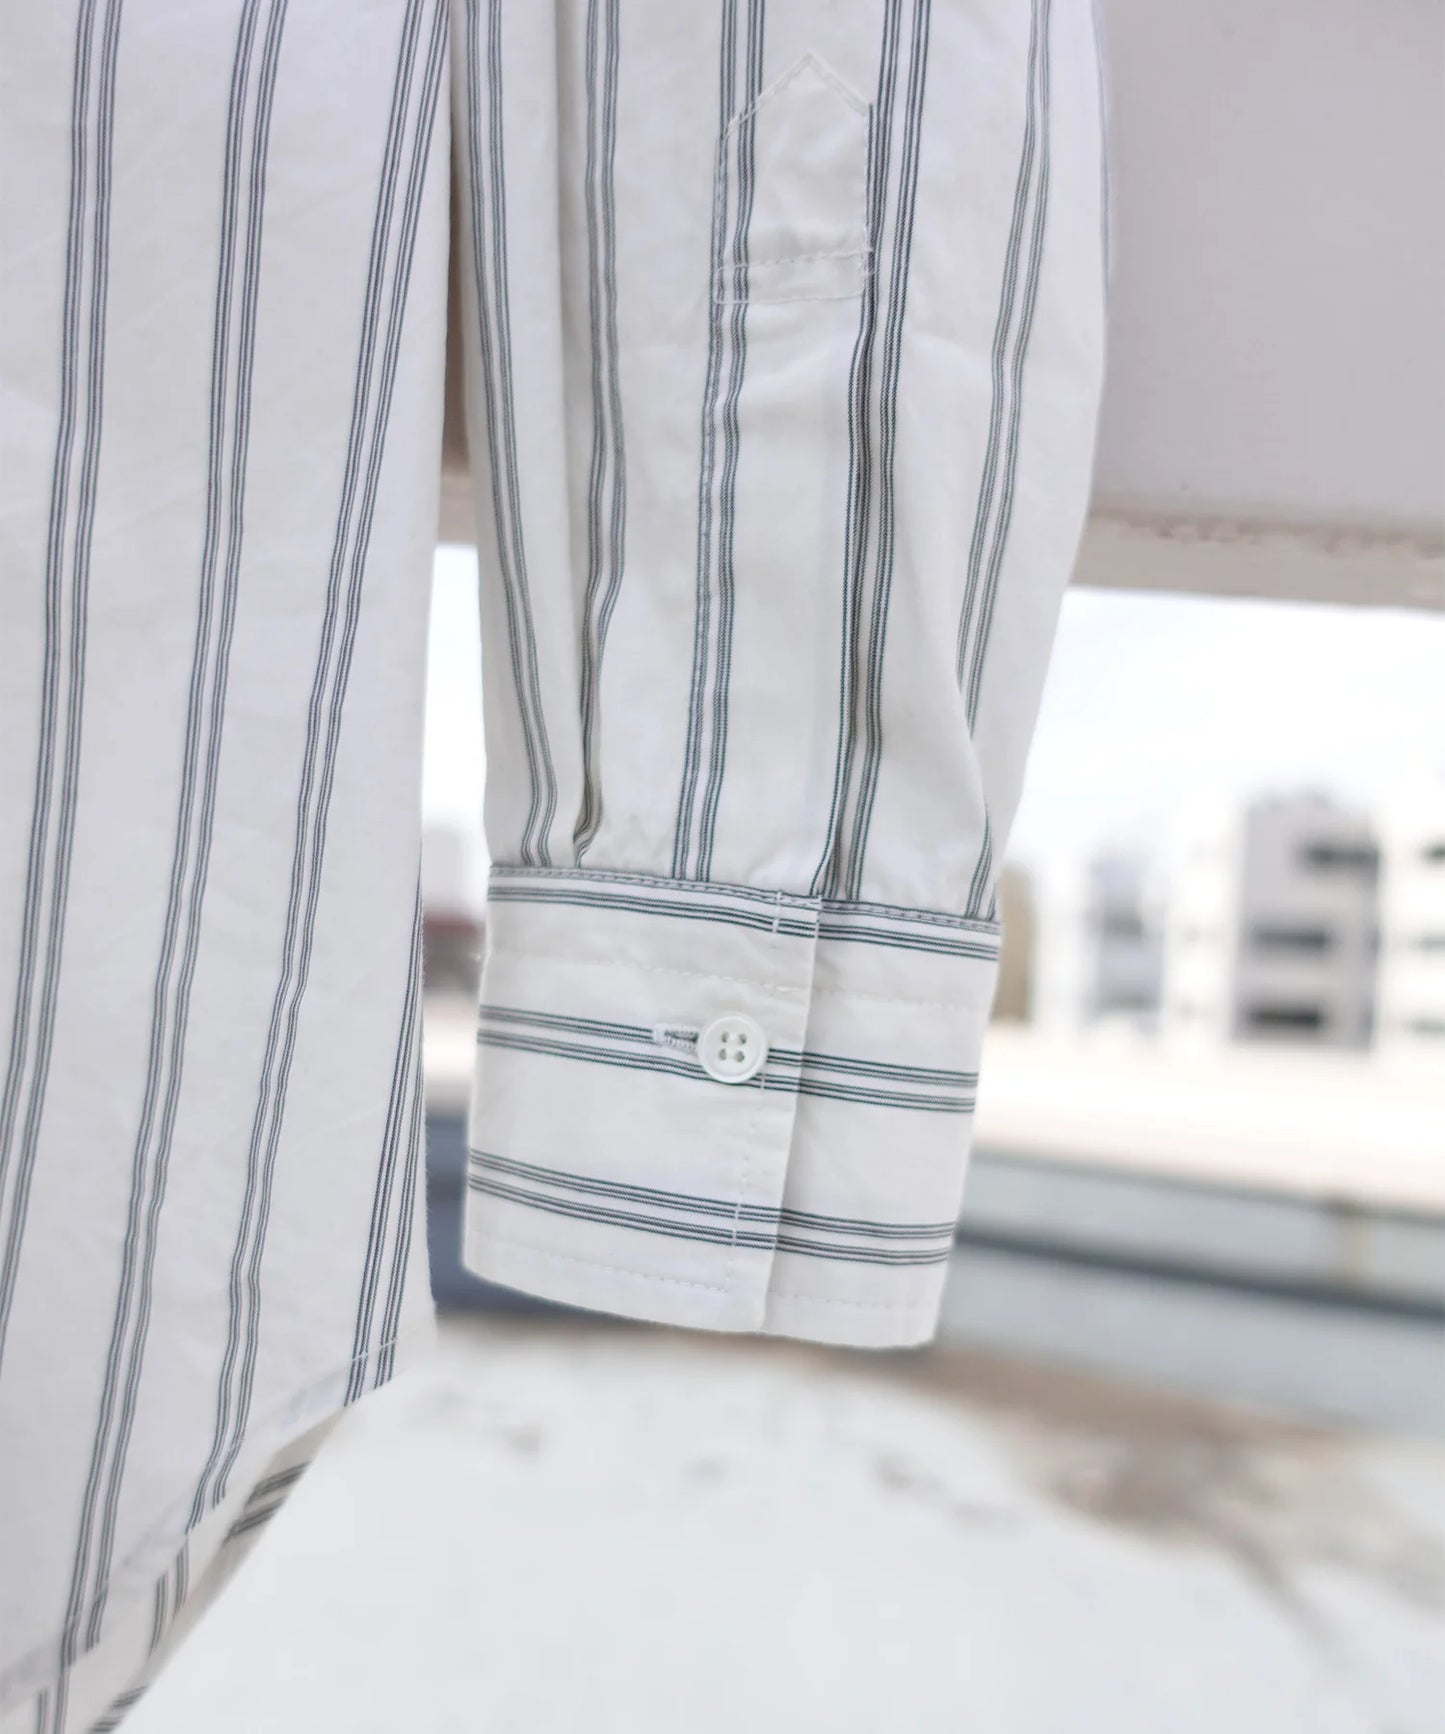 COTTON STRIPE SHIRT For both on and off use Cotton [145-175cm]